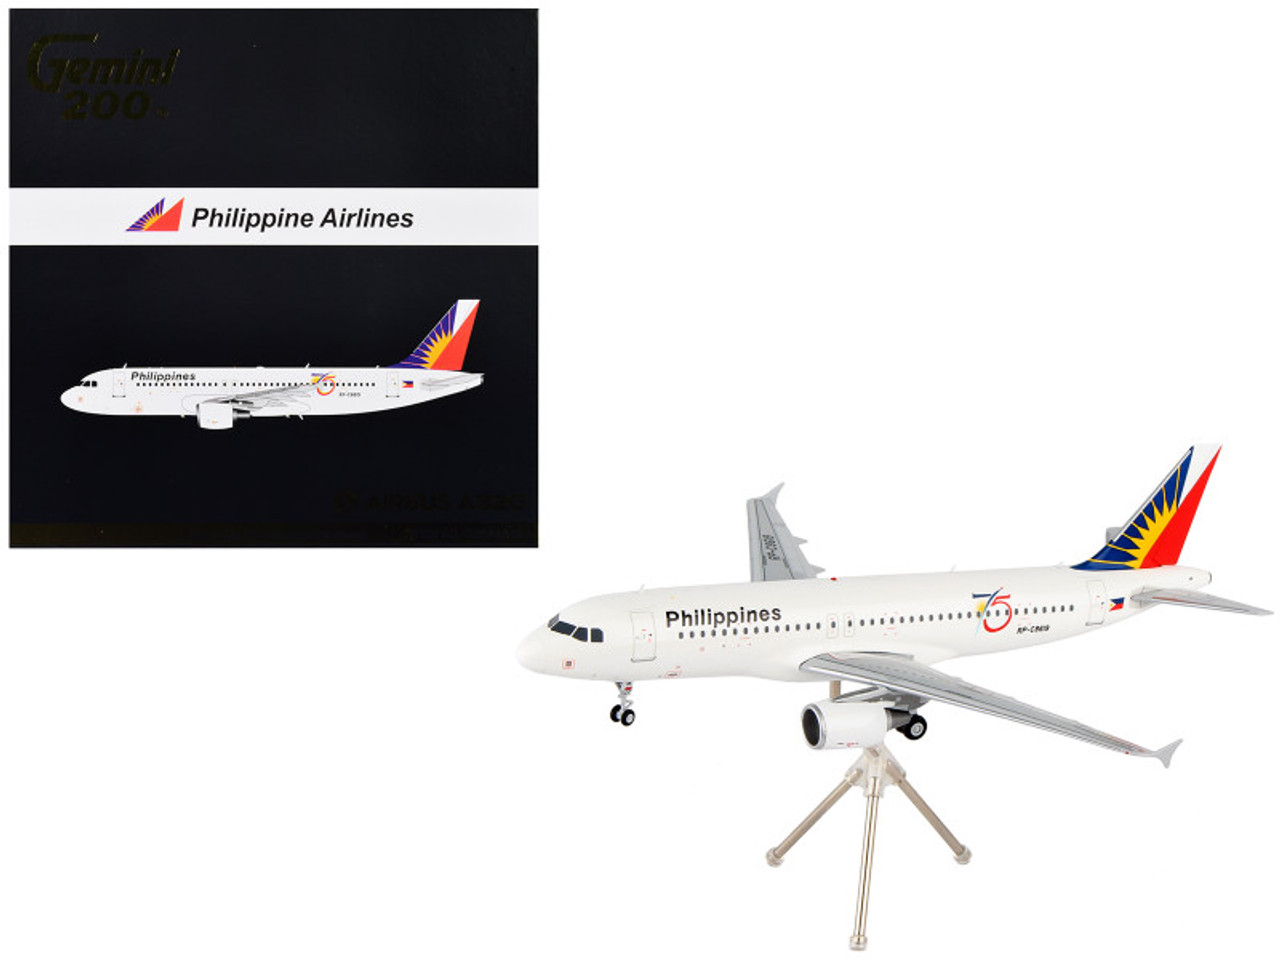 Airbus A320 Commercial Aircraft "Philippine Airlines - 75th Anniversary" White with Tail Graphics "Gemini 200" Series 1/200 Diecast Model Airplane by GeminiJets